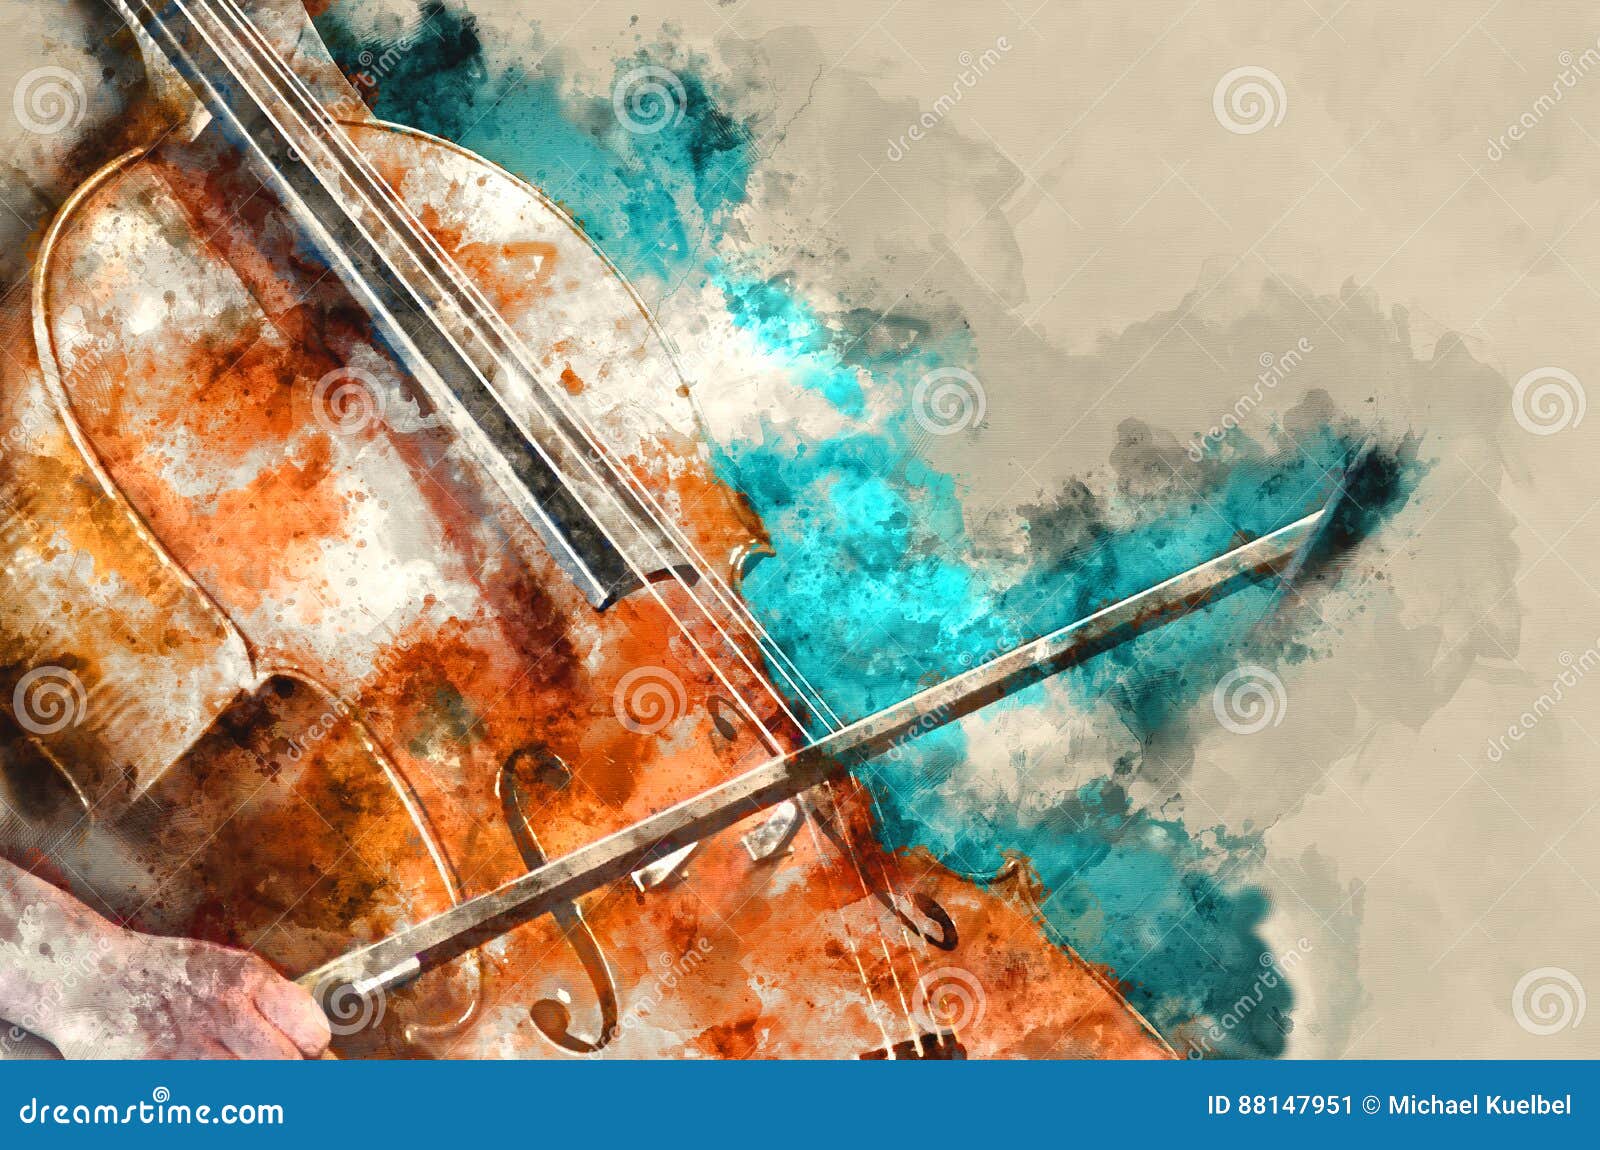 detail of a woman playing cello art painting artprint